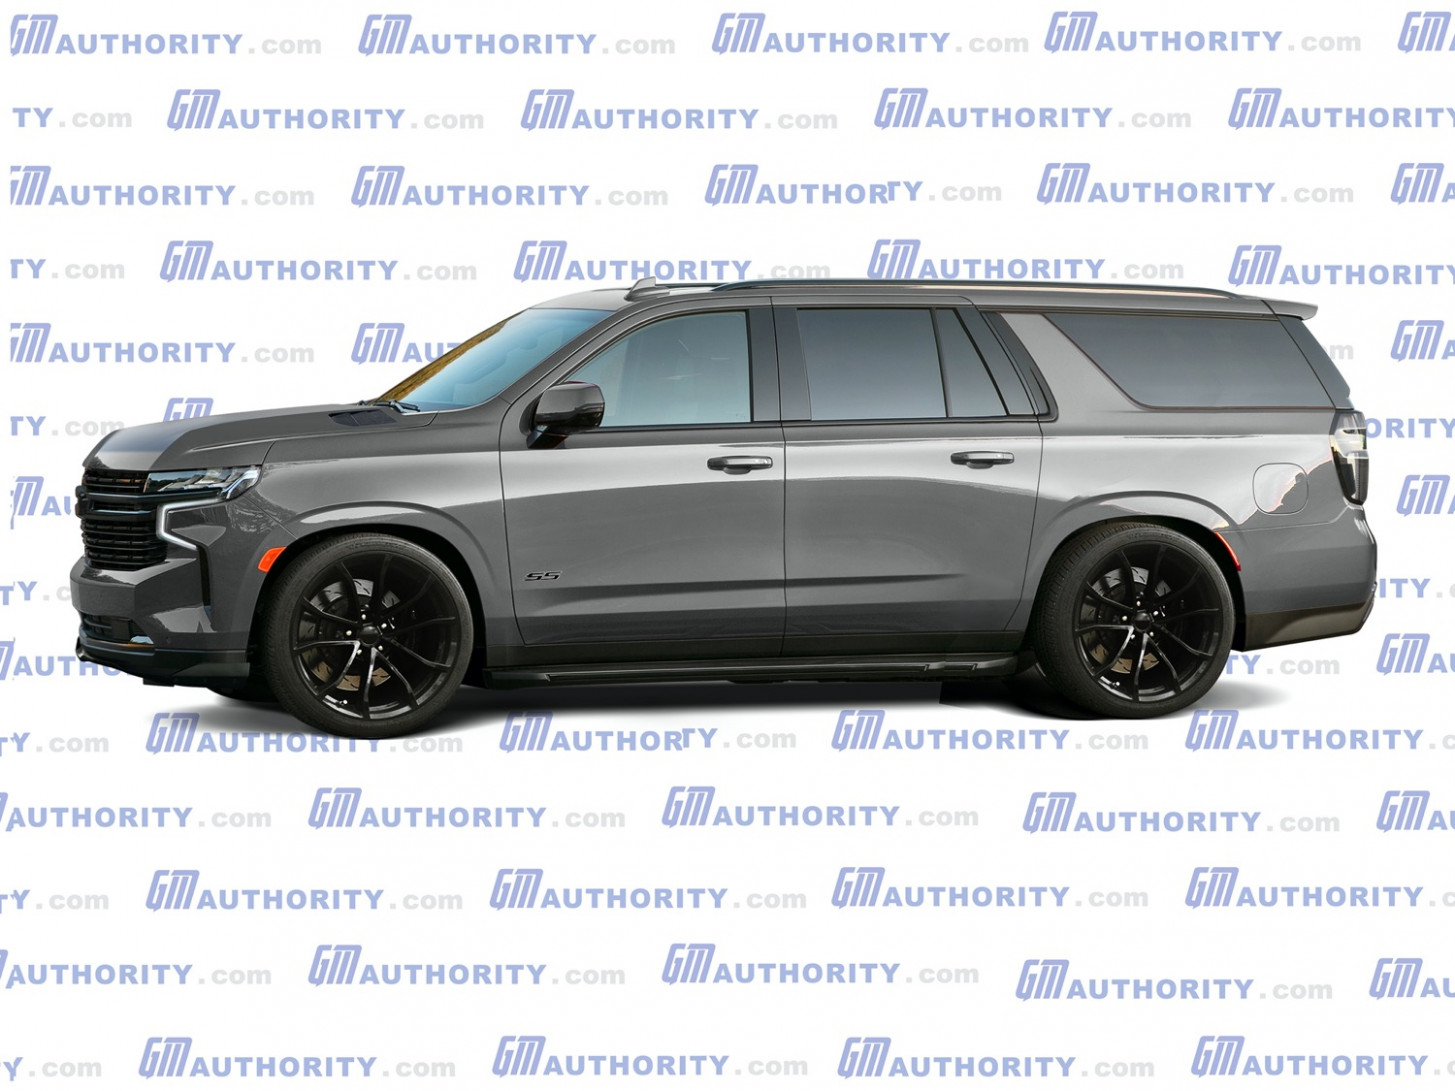 Redesign When Will The 2022 Chevrolet Suburban Be Released